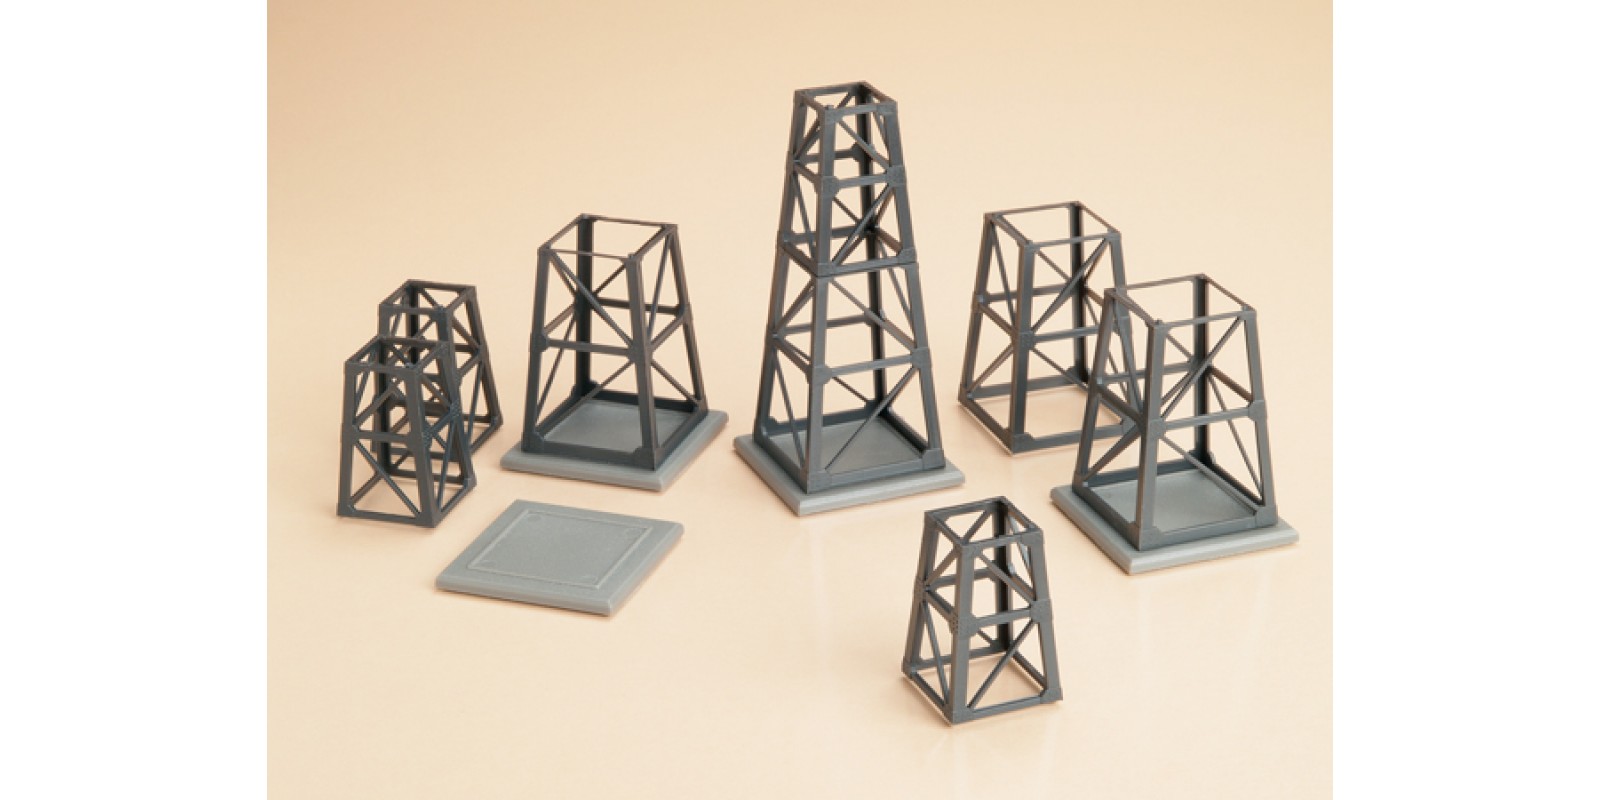 AU48640 Conical steel structures